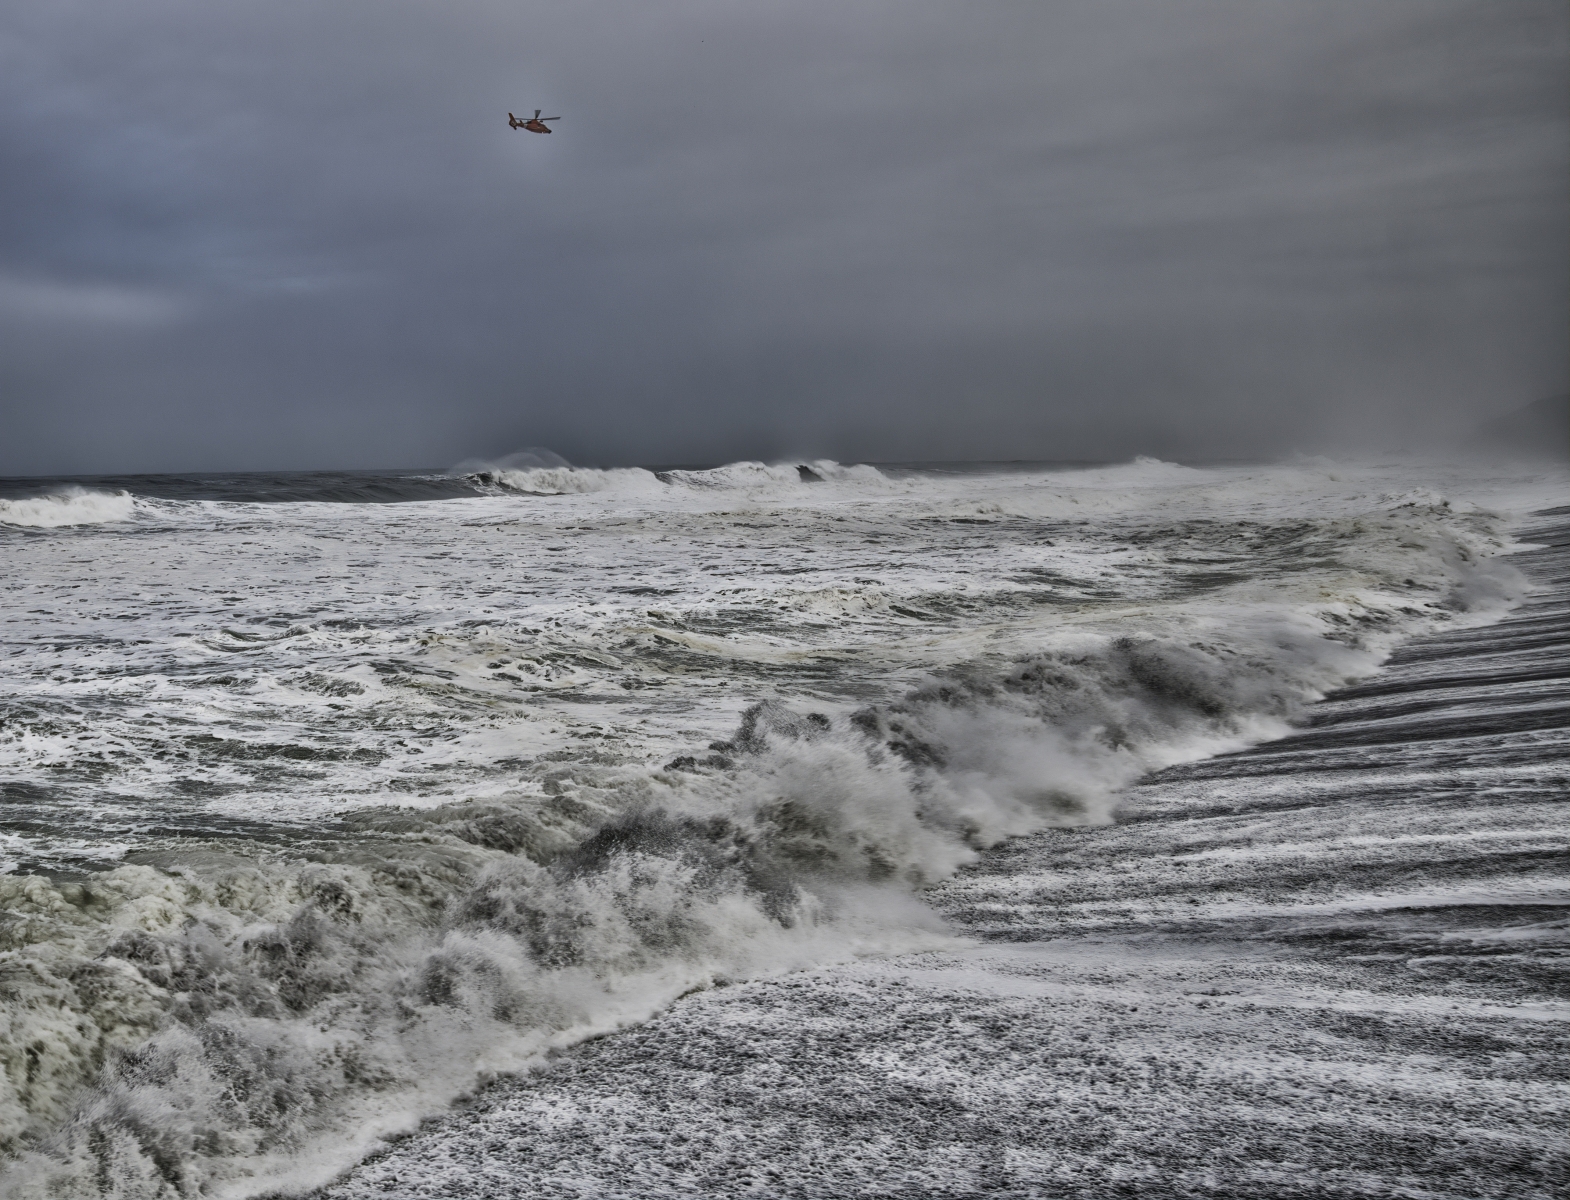 A coast guard helicopter searches the raging surf for the source of a red flare that was reported off the coast of Pacific, Ca, morning of January 18, 2019.